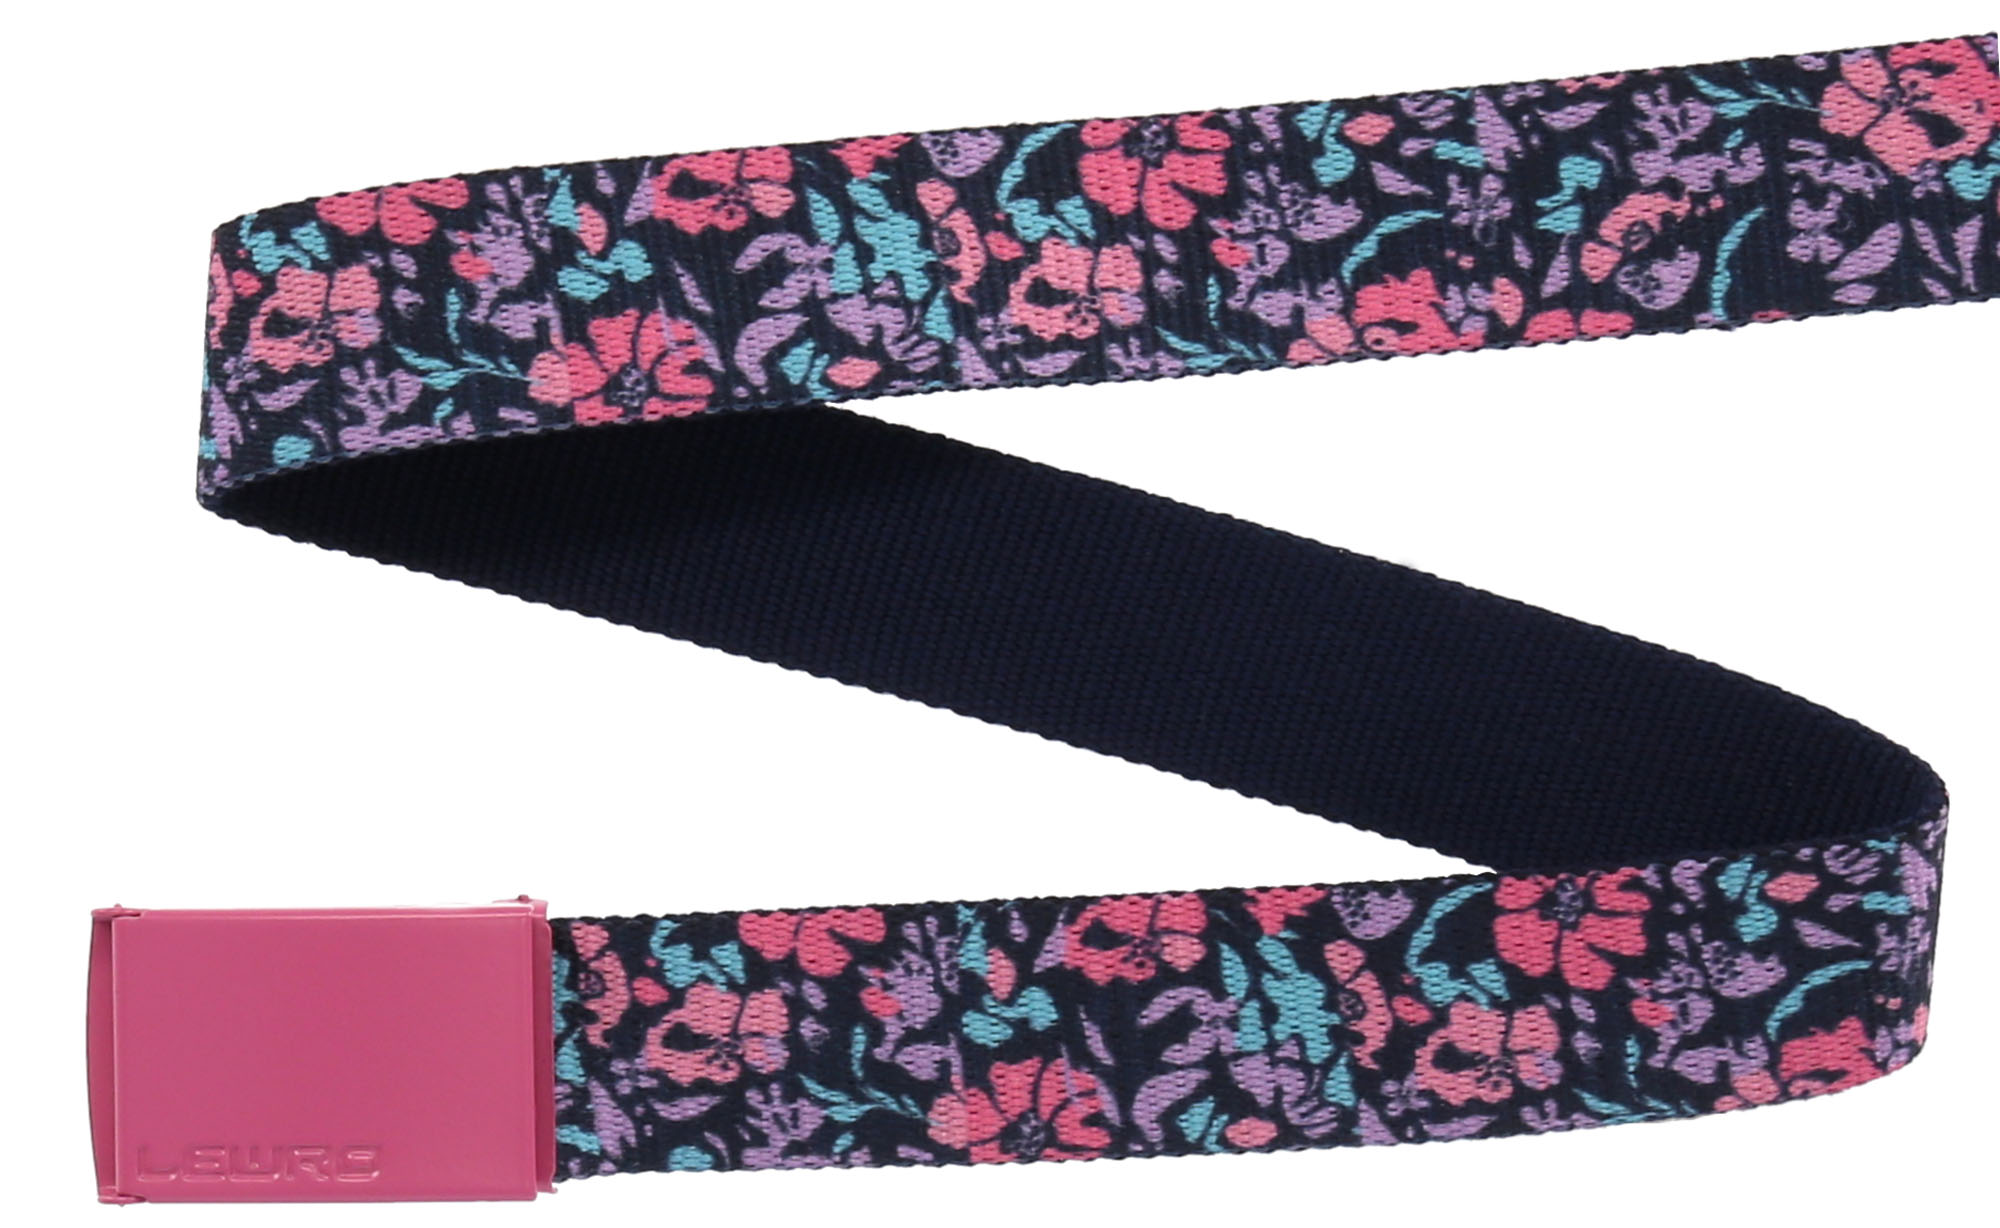 Children's fabric belt with a metal buckle